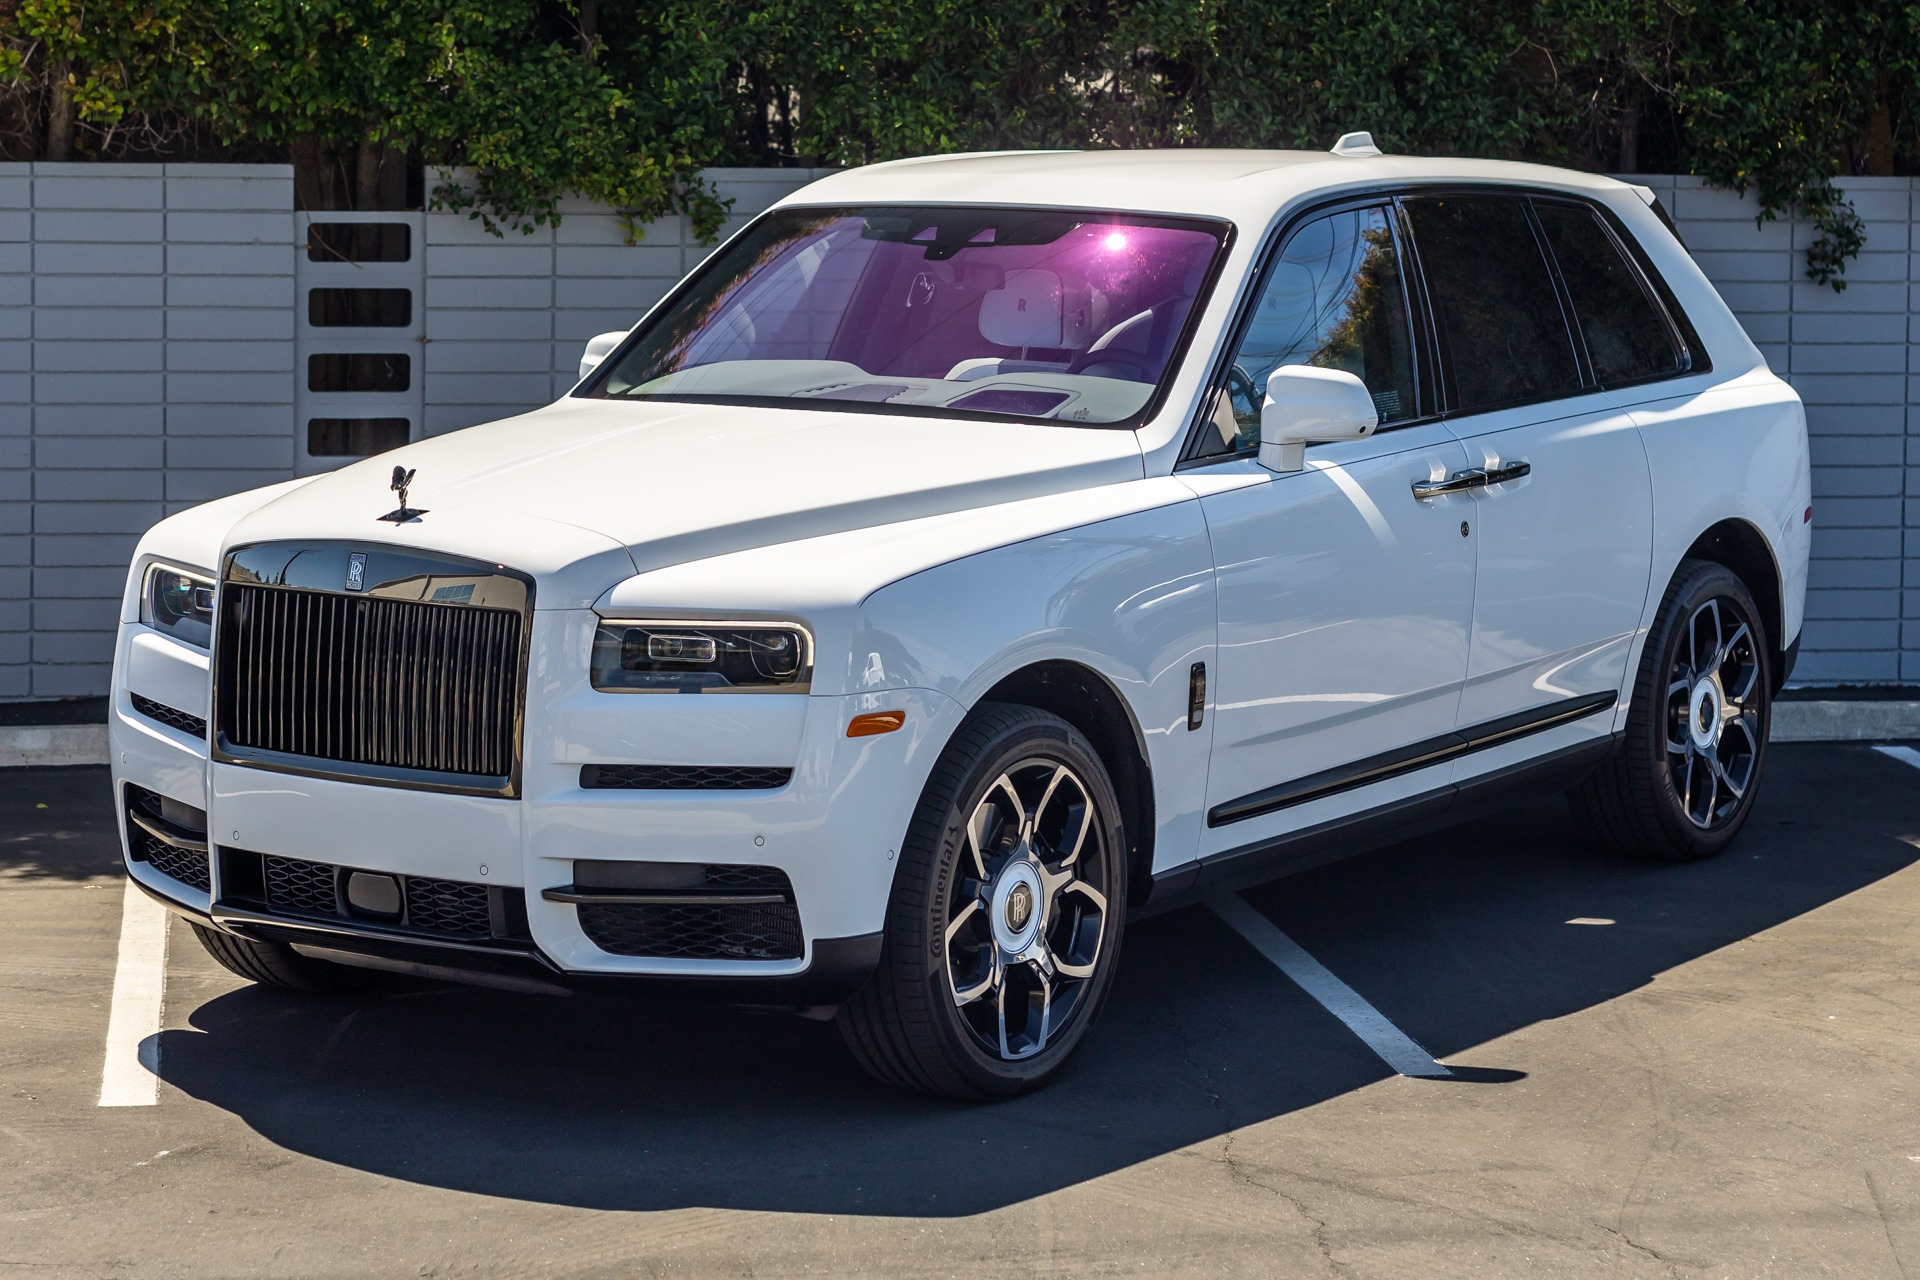 RollsRoyce Cullinan  Exotics Cars Rentals Luxury Yachts and more